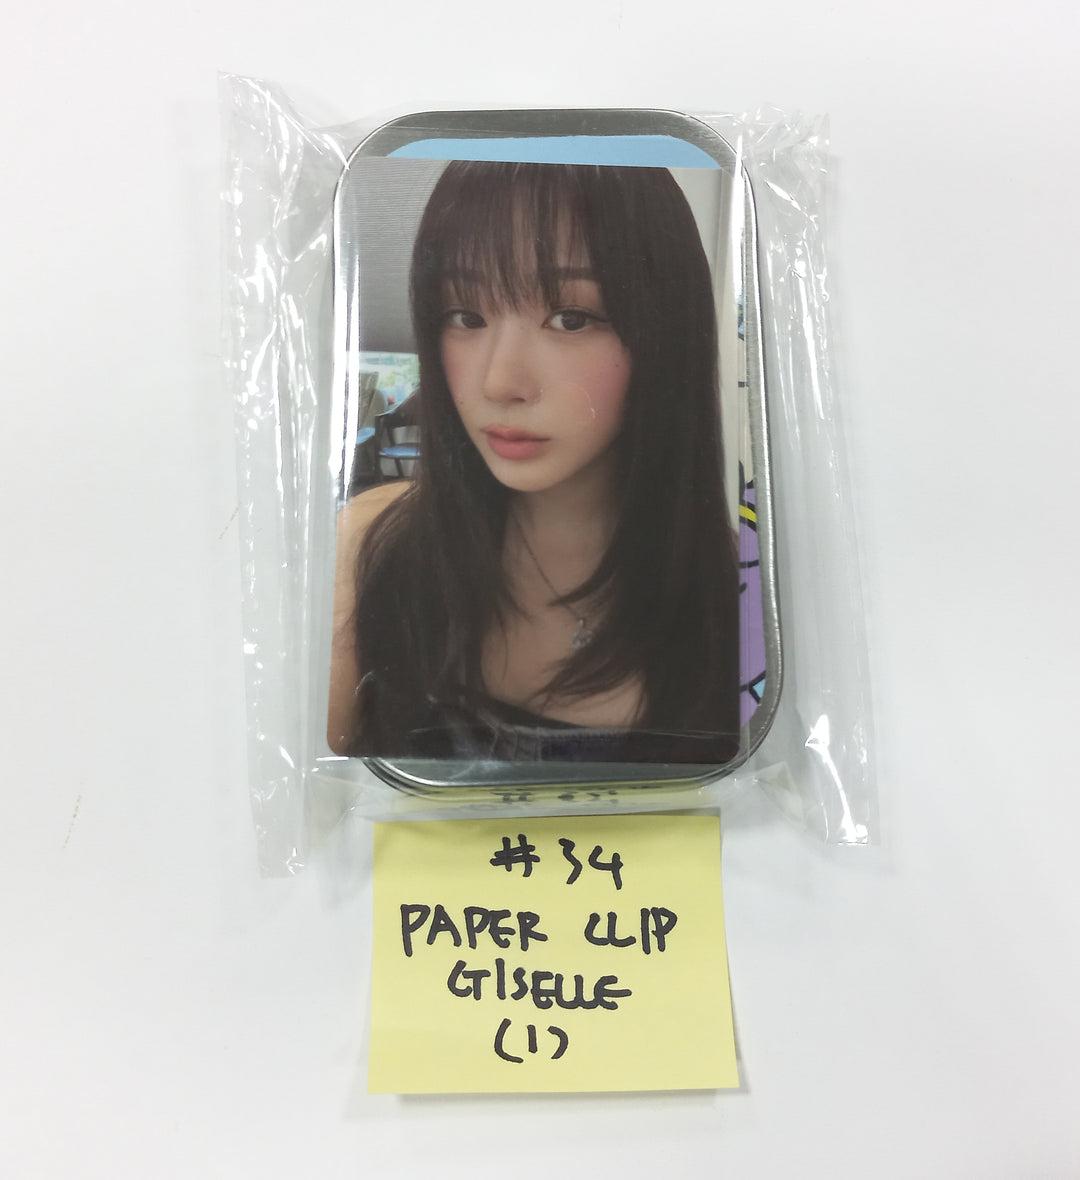 Aespa "#potd #aespa" Exhibition - Official MD (AR Card, Shaker Diary, Chain Keyring, Photocard Holder, Jewel Sticker, Postcard Set, Voice Memory Tape, Mini Collect Book, Tin Button Set) Round 3 (2) [23.10.07]